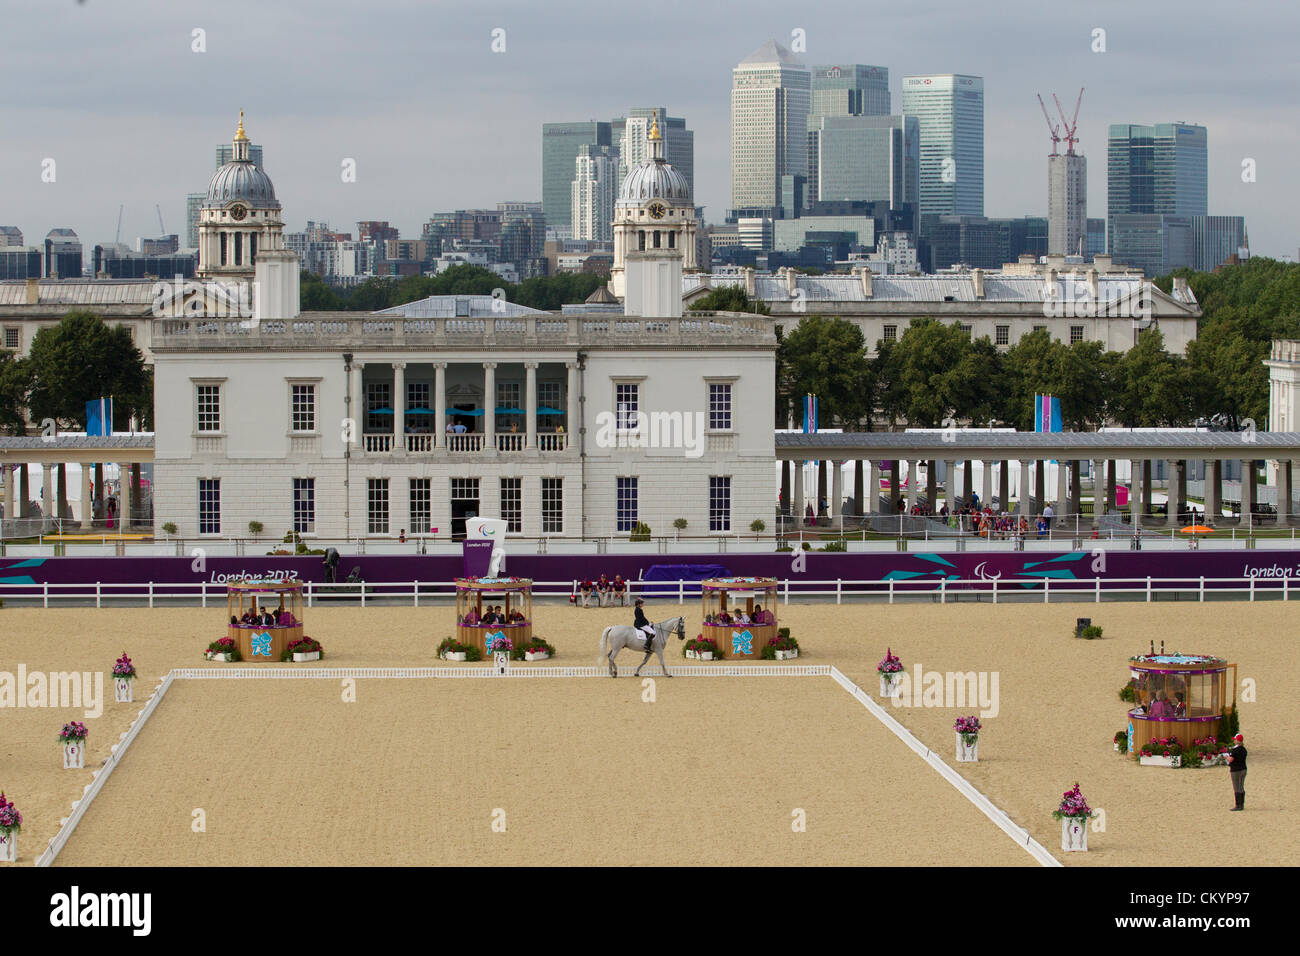 The scene at London's Greenwich Park equestrian venue for the individual dressage competition at the Paralympics. Stock Photo